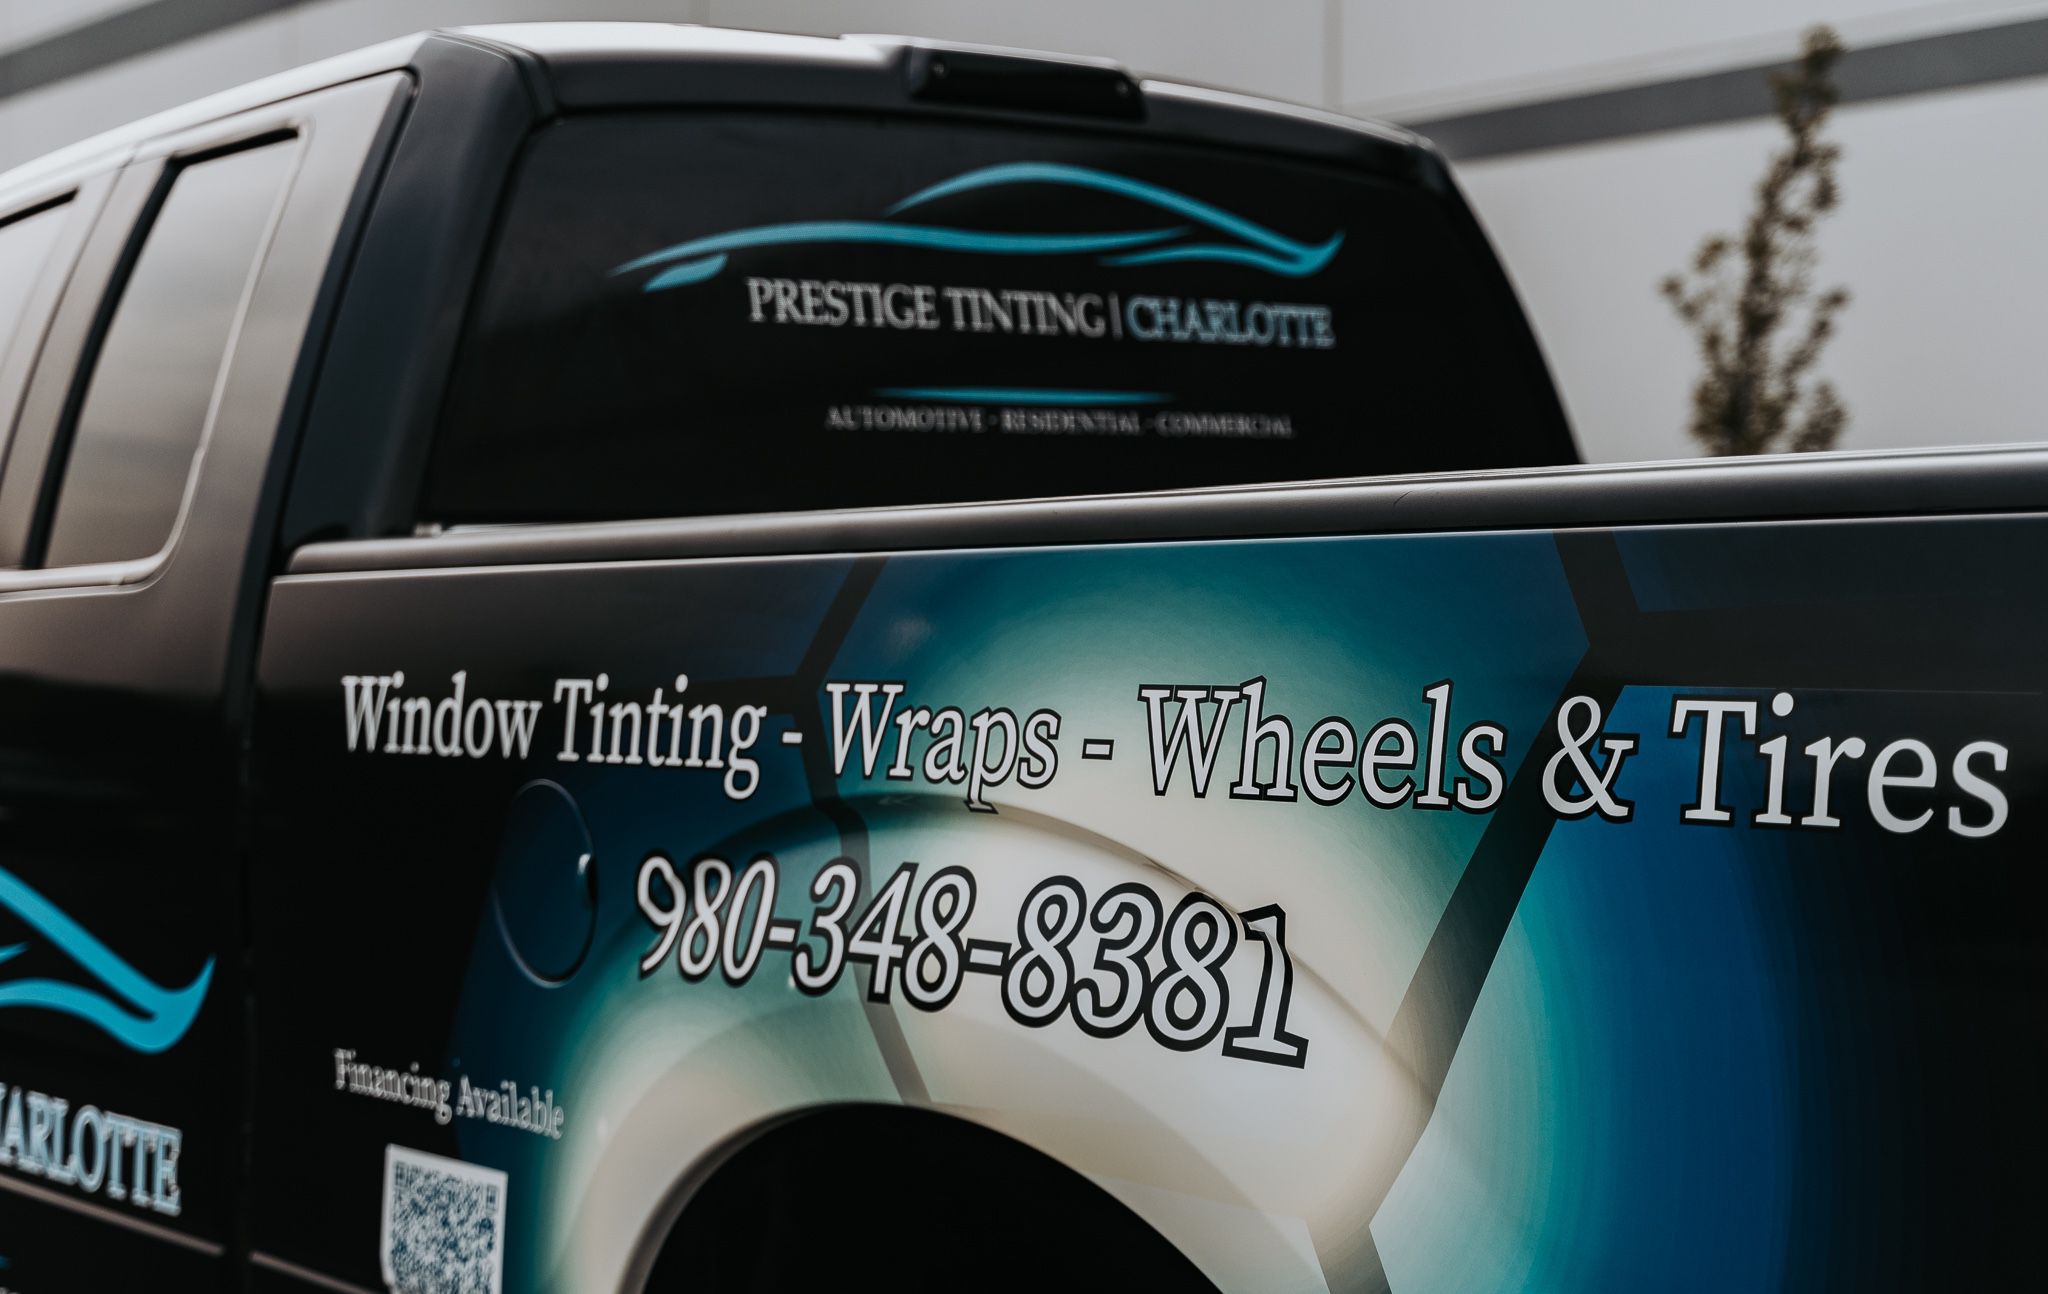 Business Wrap Advertising 